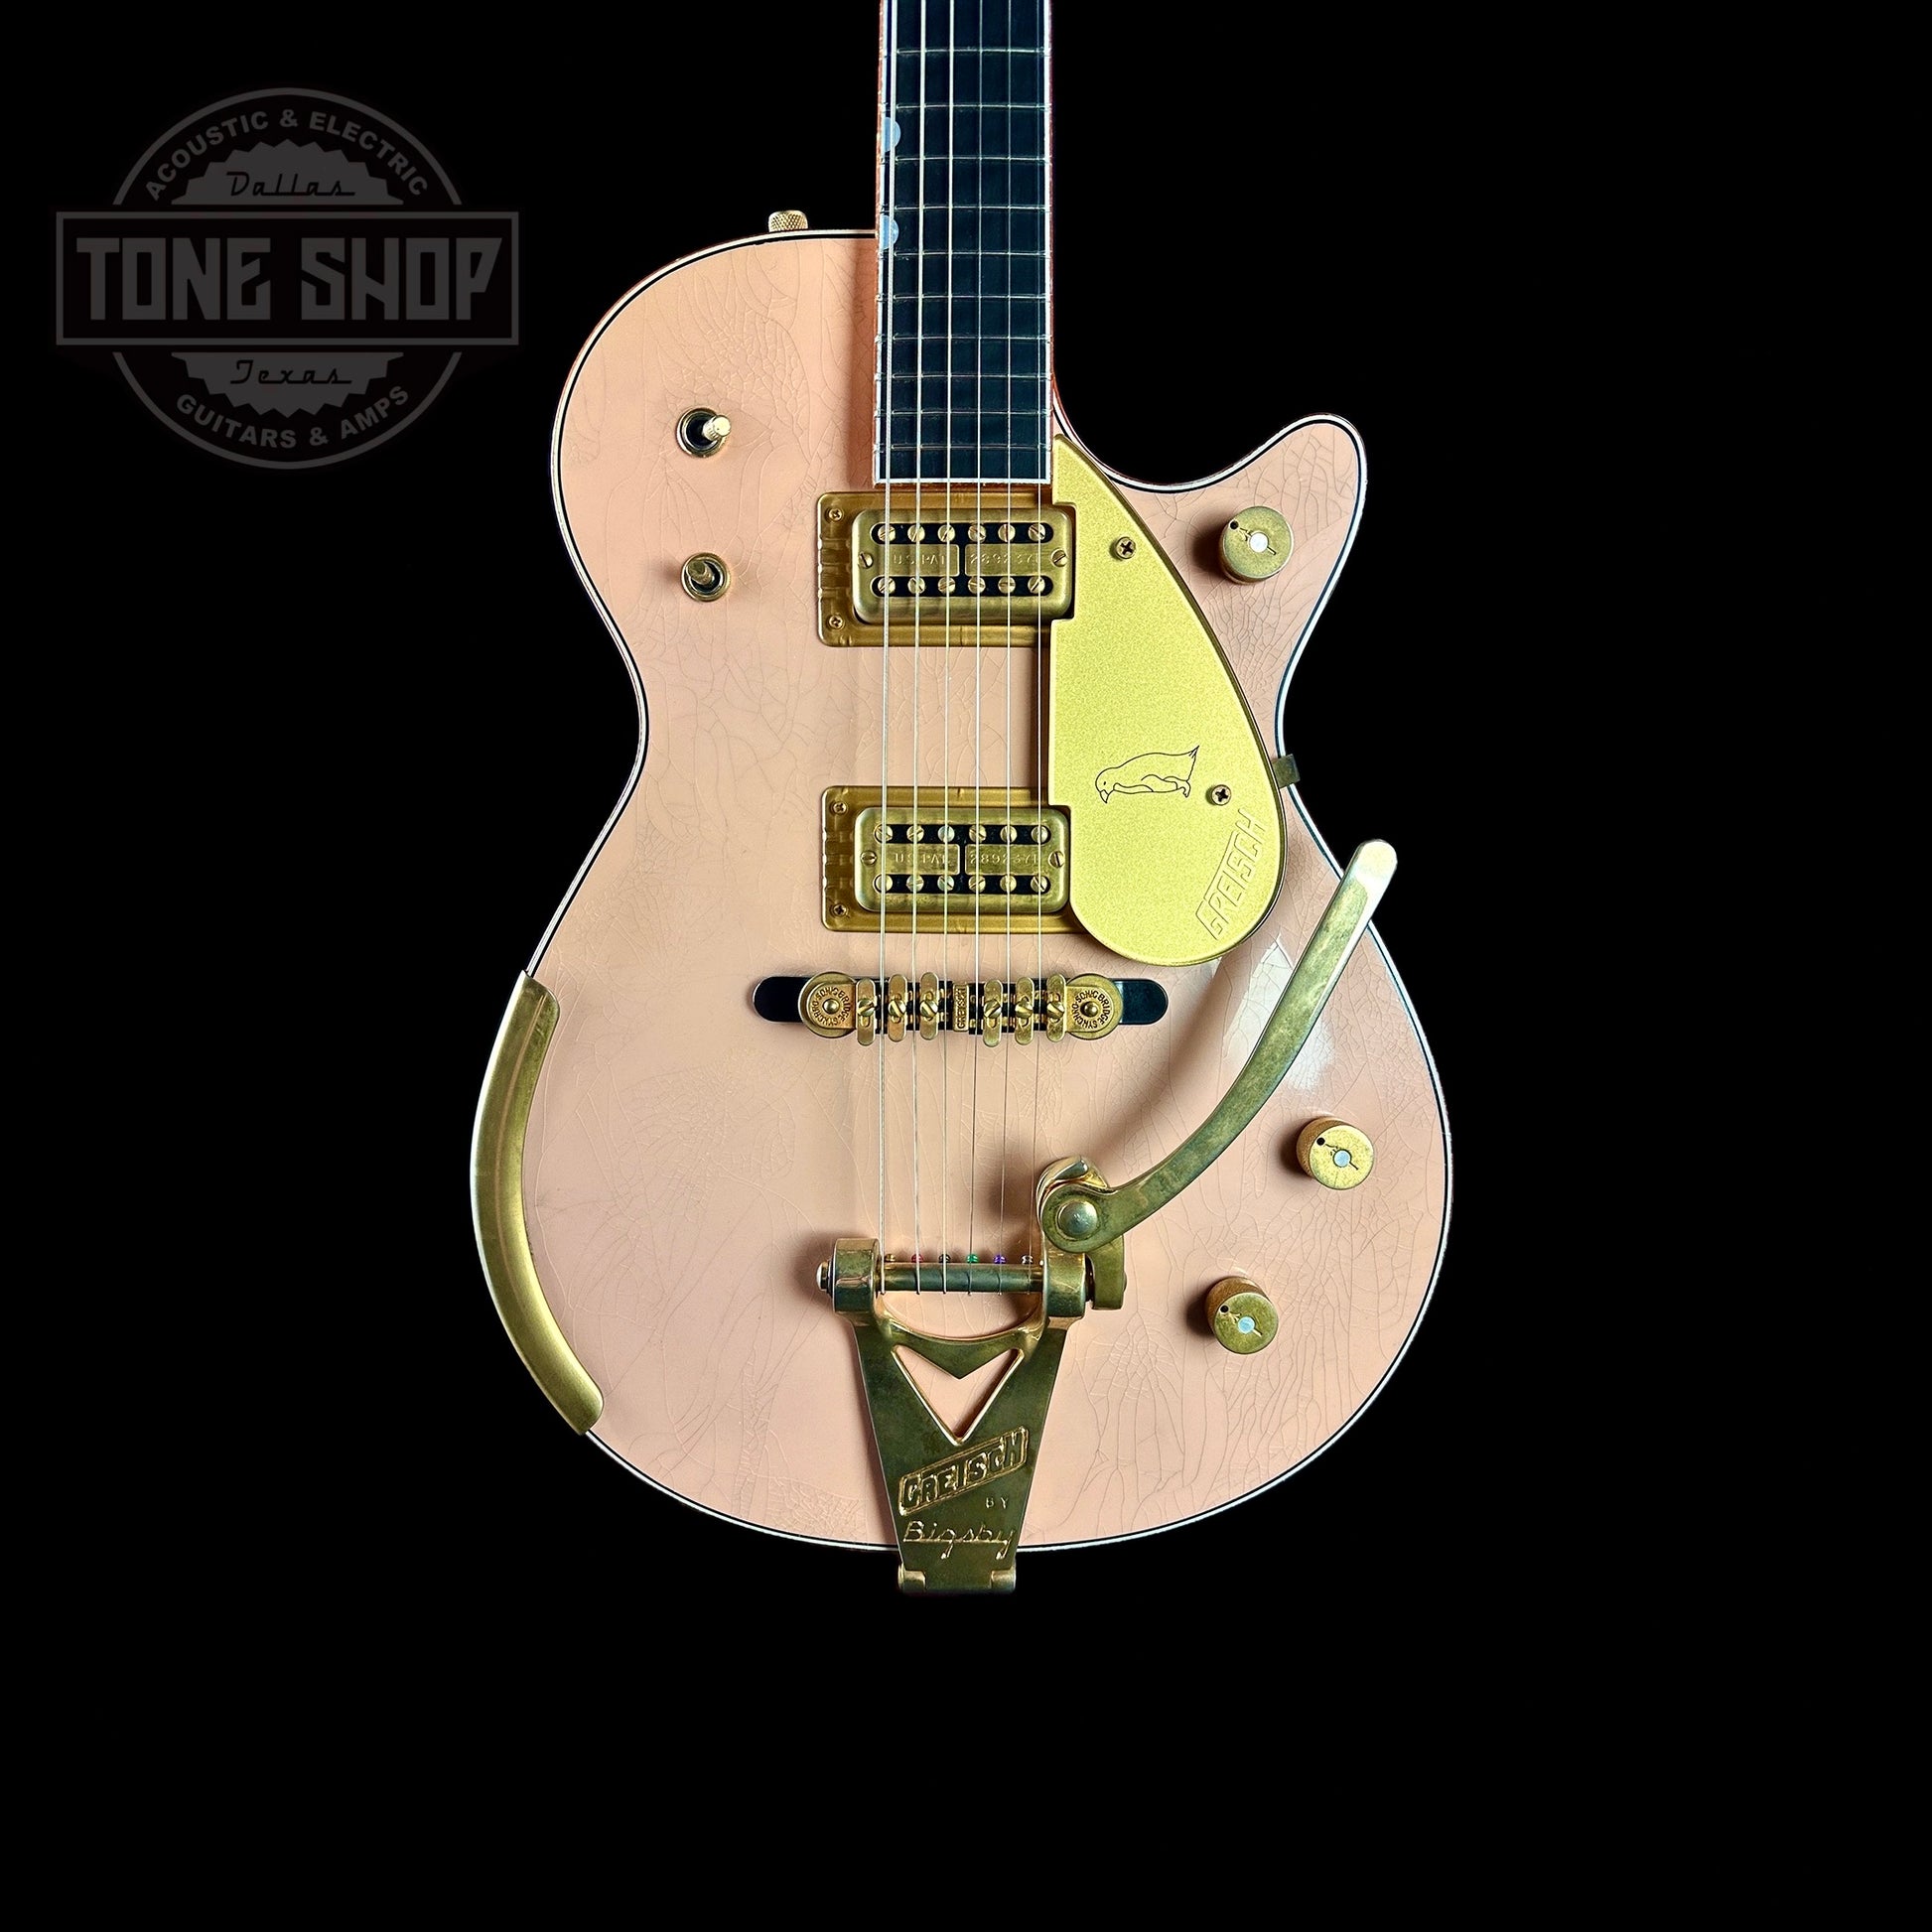 Front of body of Gretsch Custom Shop G6134-59 Penguin Relic Shell Pink Masterbuilt By Gonzalo Madrigal.